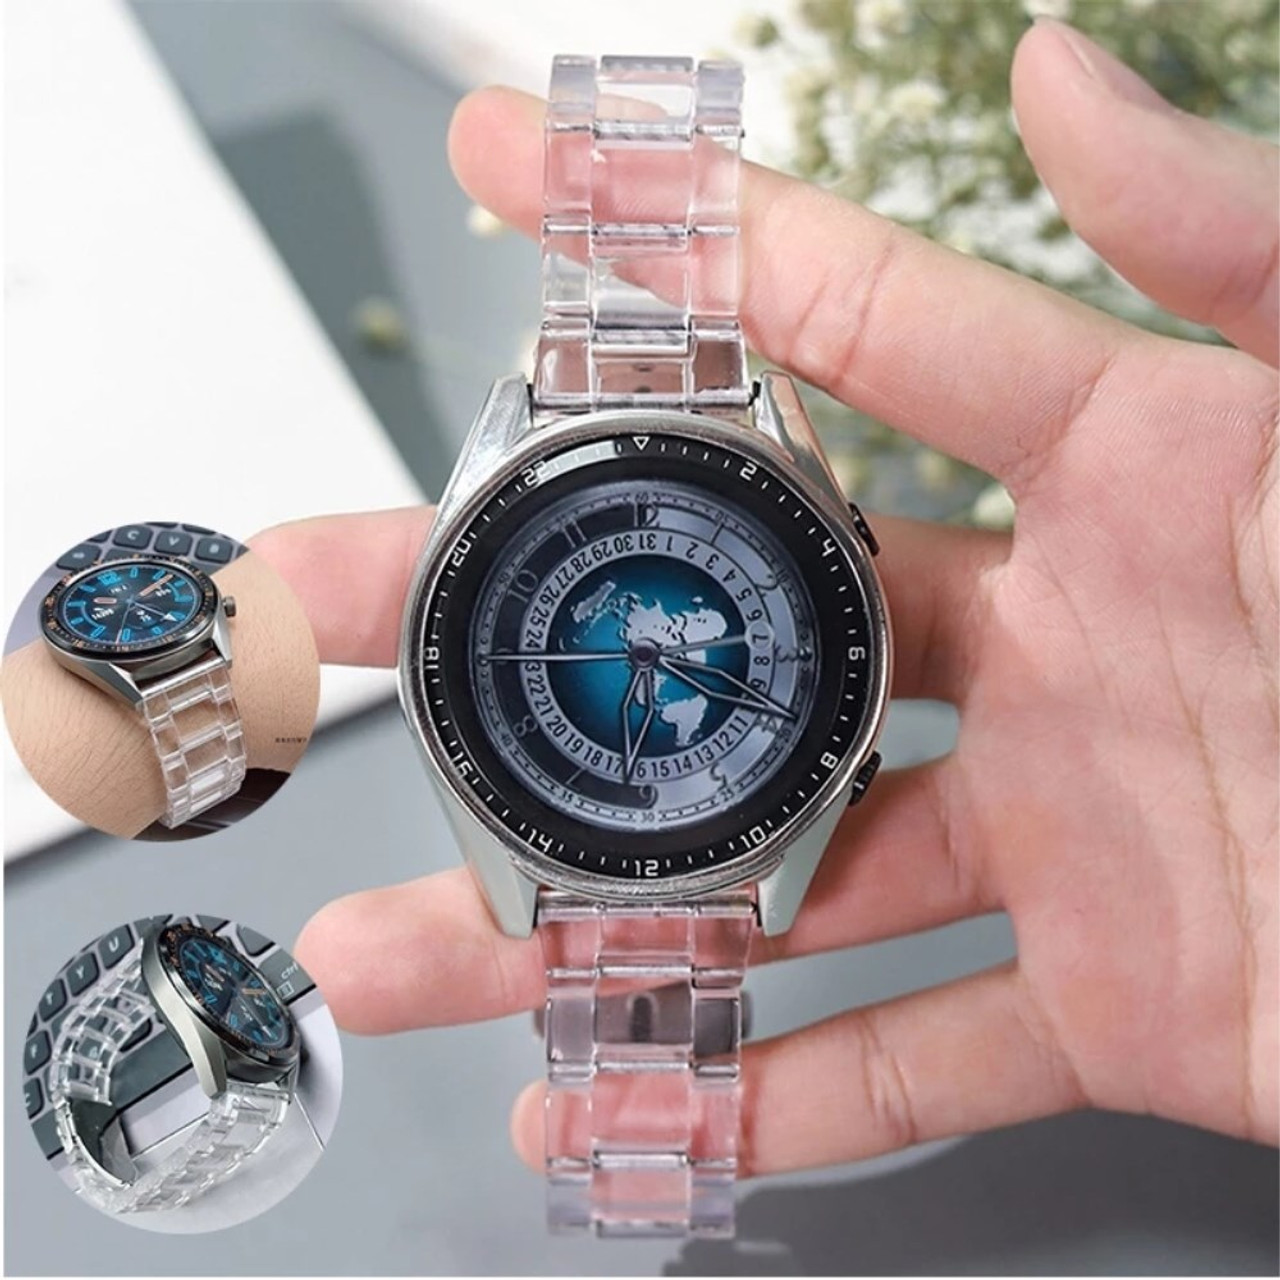 Transparent Band for Samsung Galaxy Watch 4/Classic/46mm/42mm/40mm